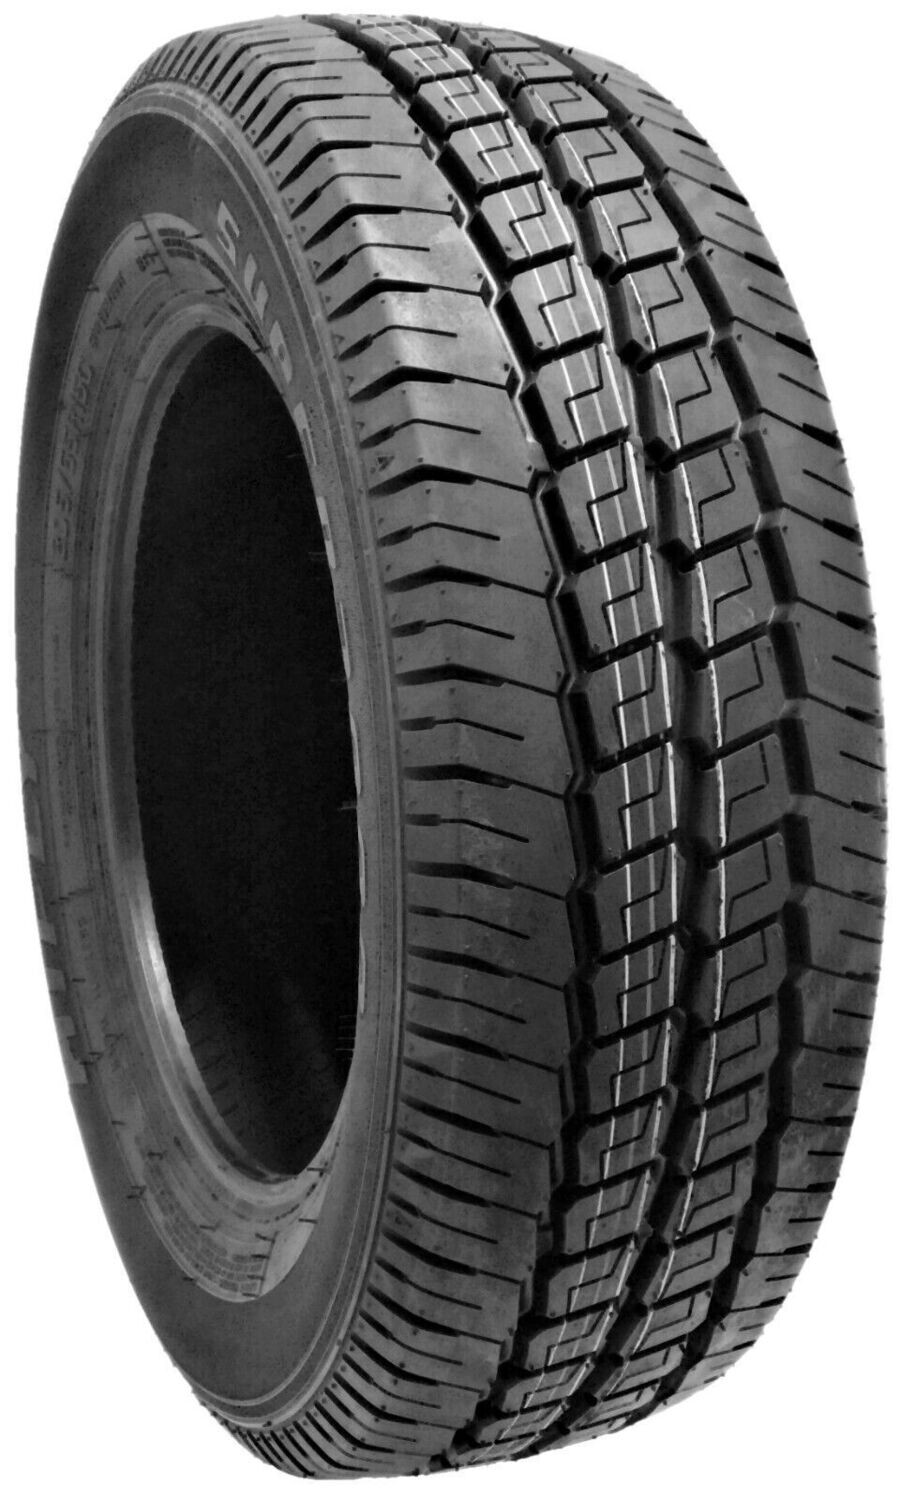 COMMERCIAL Tyre 15"